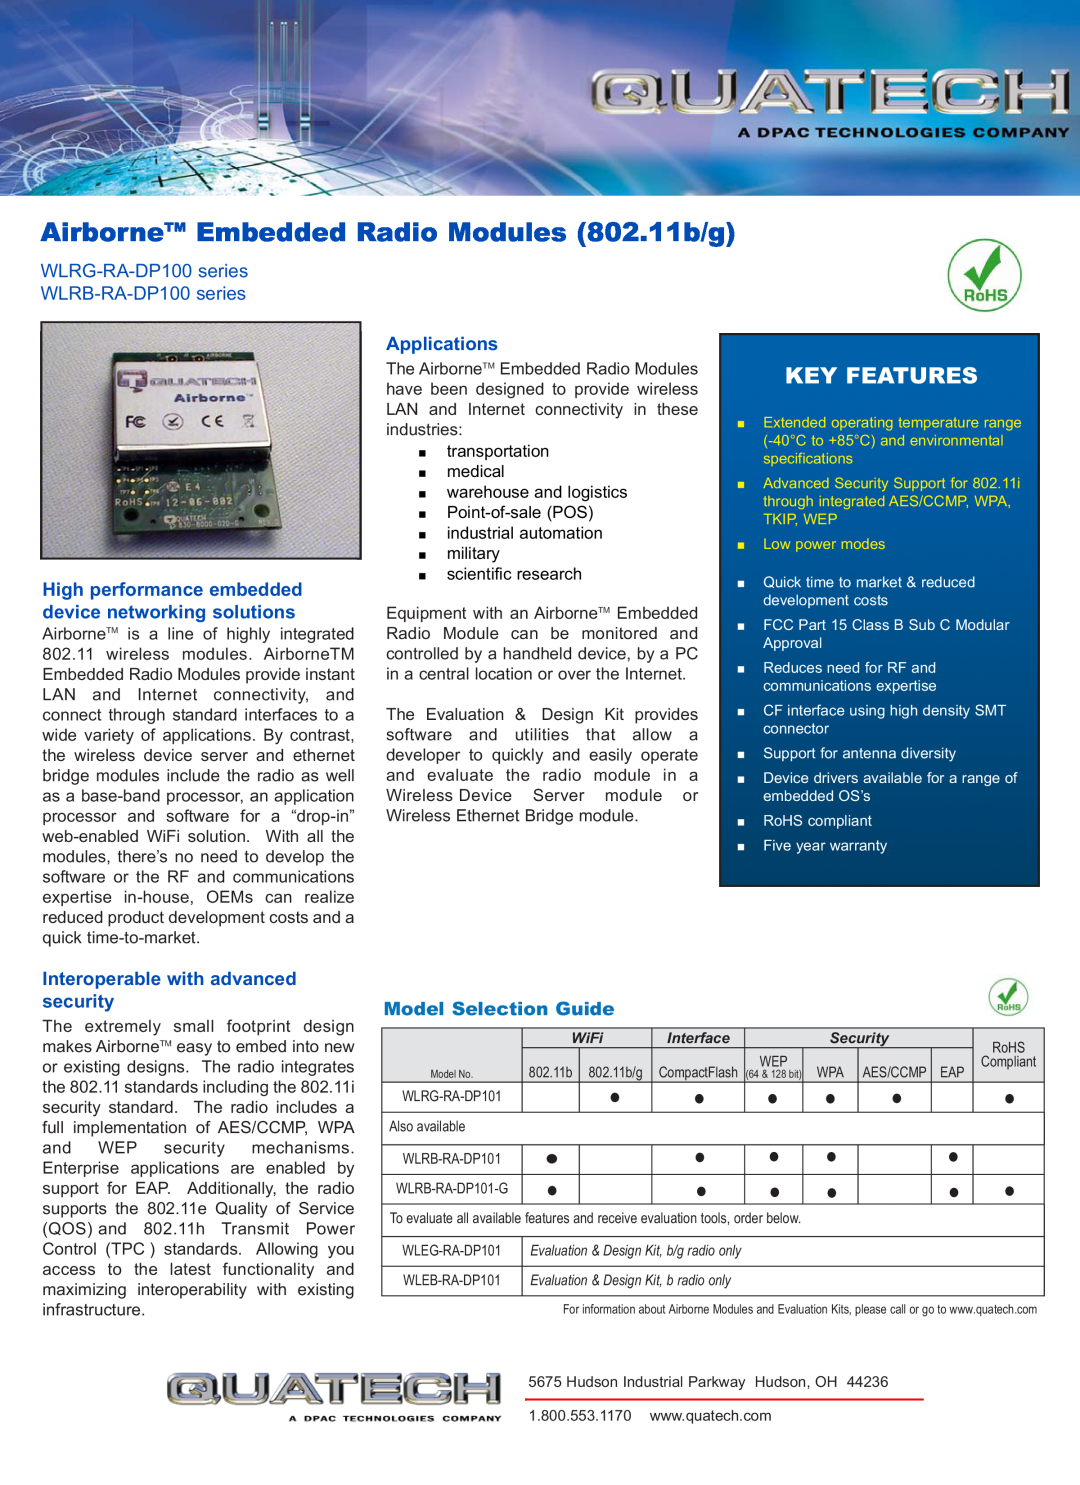 Quatech WLRB-RA-DP100 specifications Model Selection Guide, AirborneTM Embedded Radio Modules 802.11b/g, Key Features 